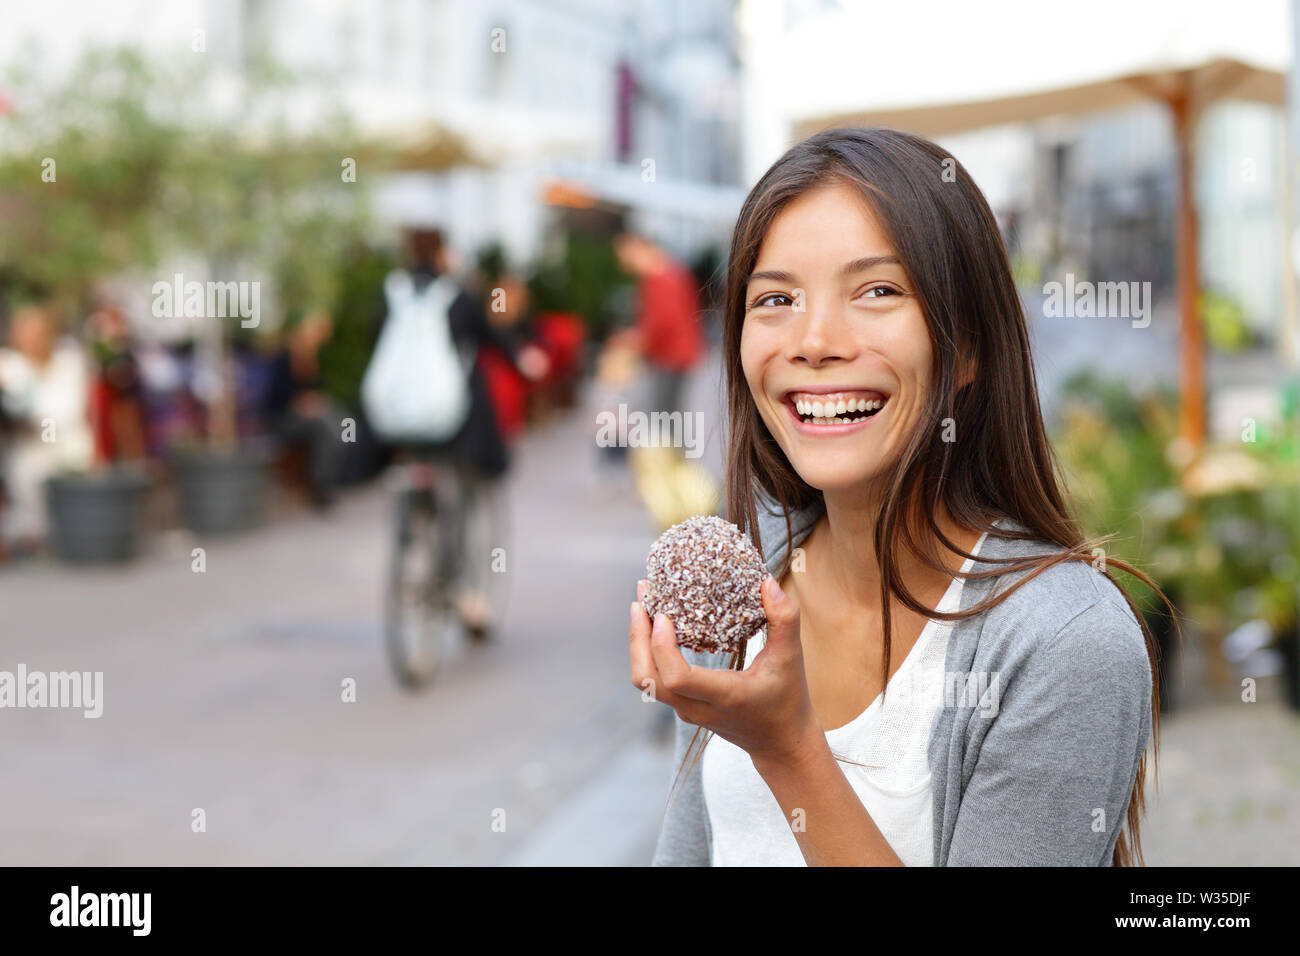 Woman eating traditional danish food floedeboller also called cream buns or marshmallow teacake. Girl enjoying the chocolate covered treat outside in city street of Copenhagen, Denmark. Stock Photo